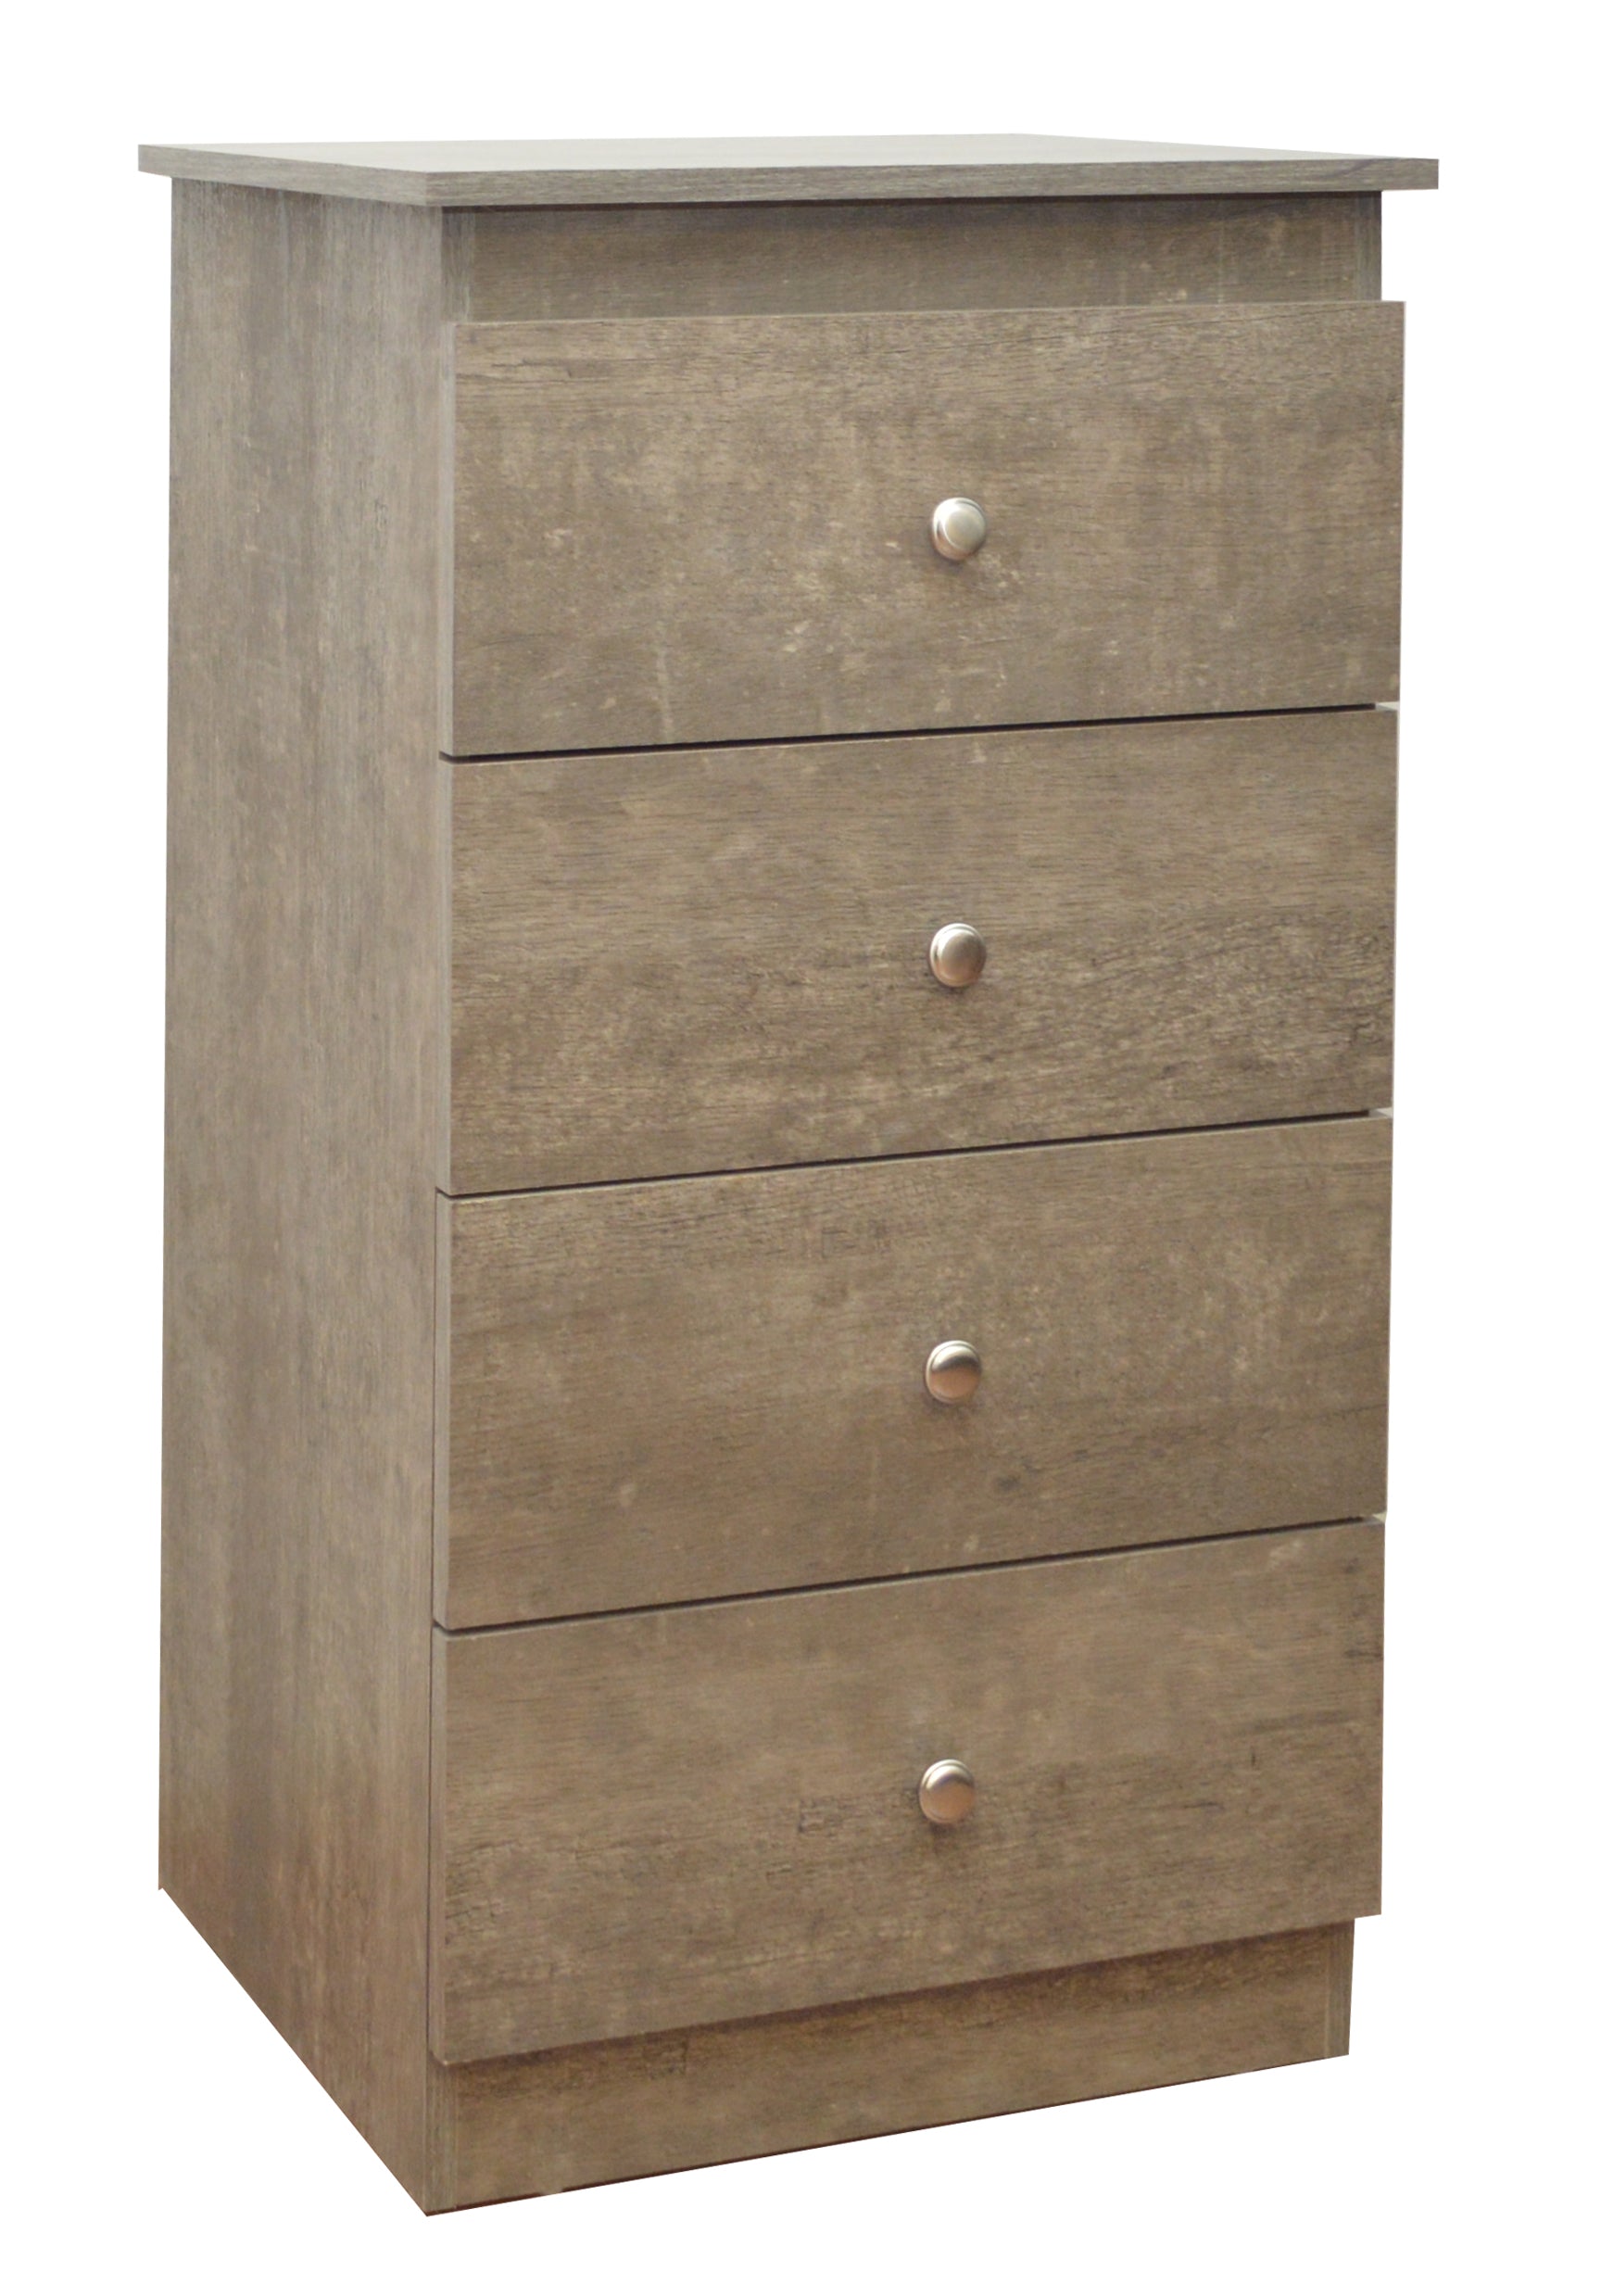 4 Drawer Narrow Tall Chest